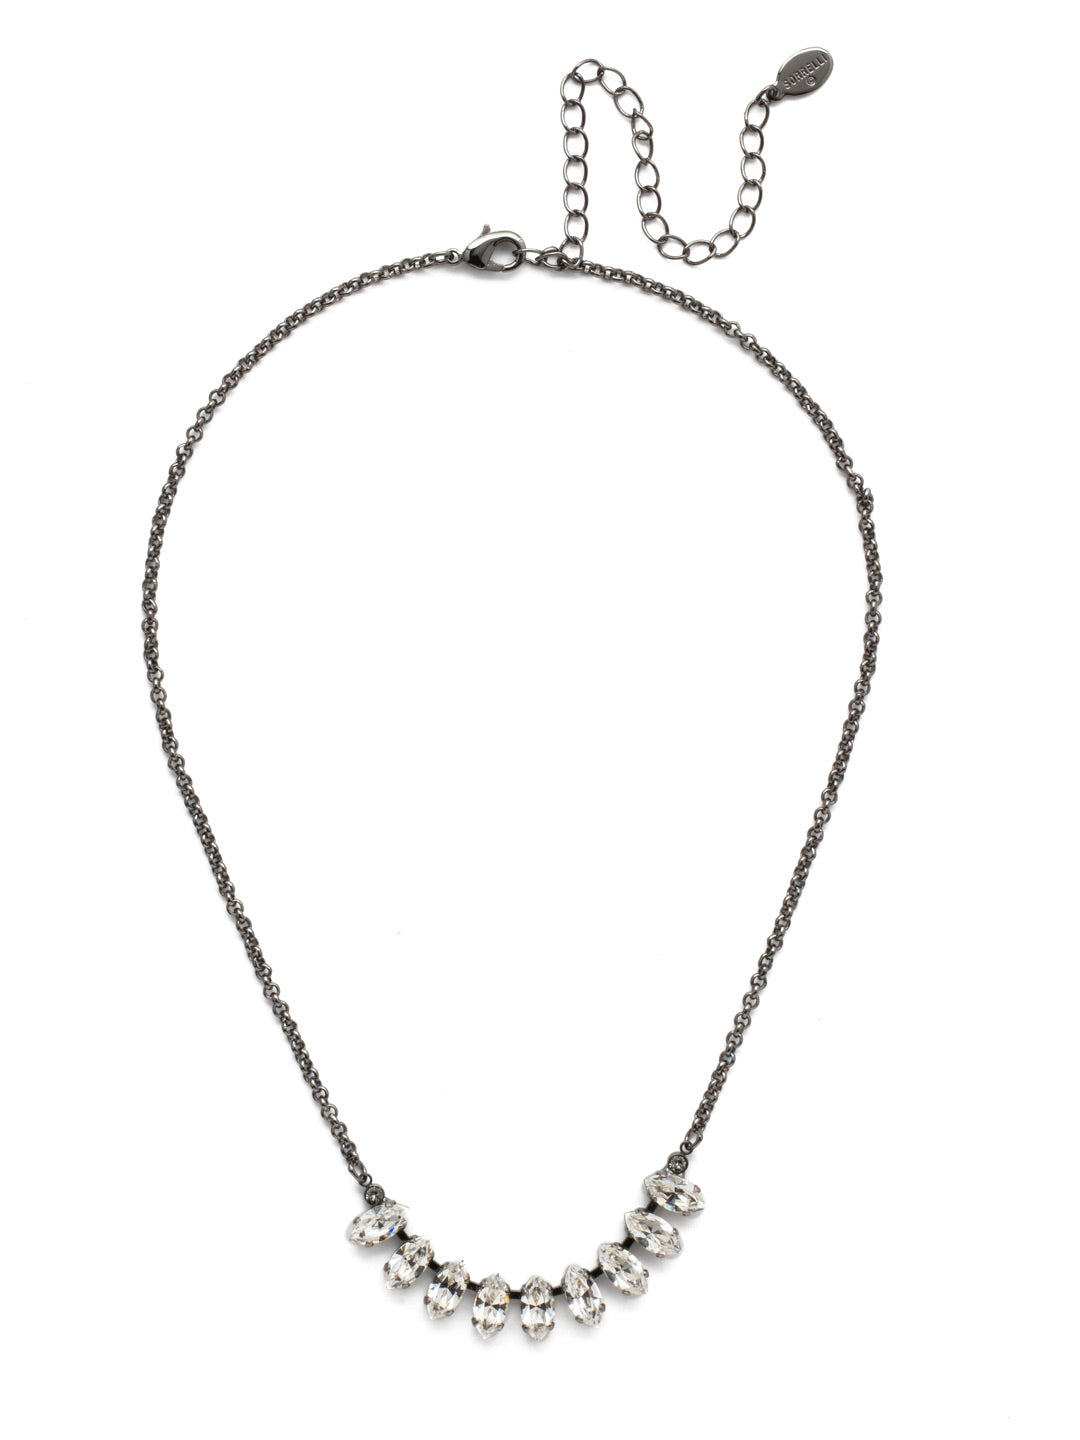 Clarissa Tennis Necklace - NEP4GMMMO - <p>The Clarissa Tennis Necklace puts a row of sparkling navette crystals front and center. Put it on when you want to be there, too. From Sorrelli's Midnight Moon collection in our Gun Metal finish.</p>